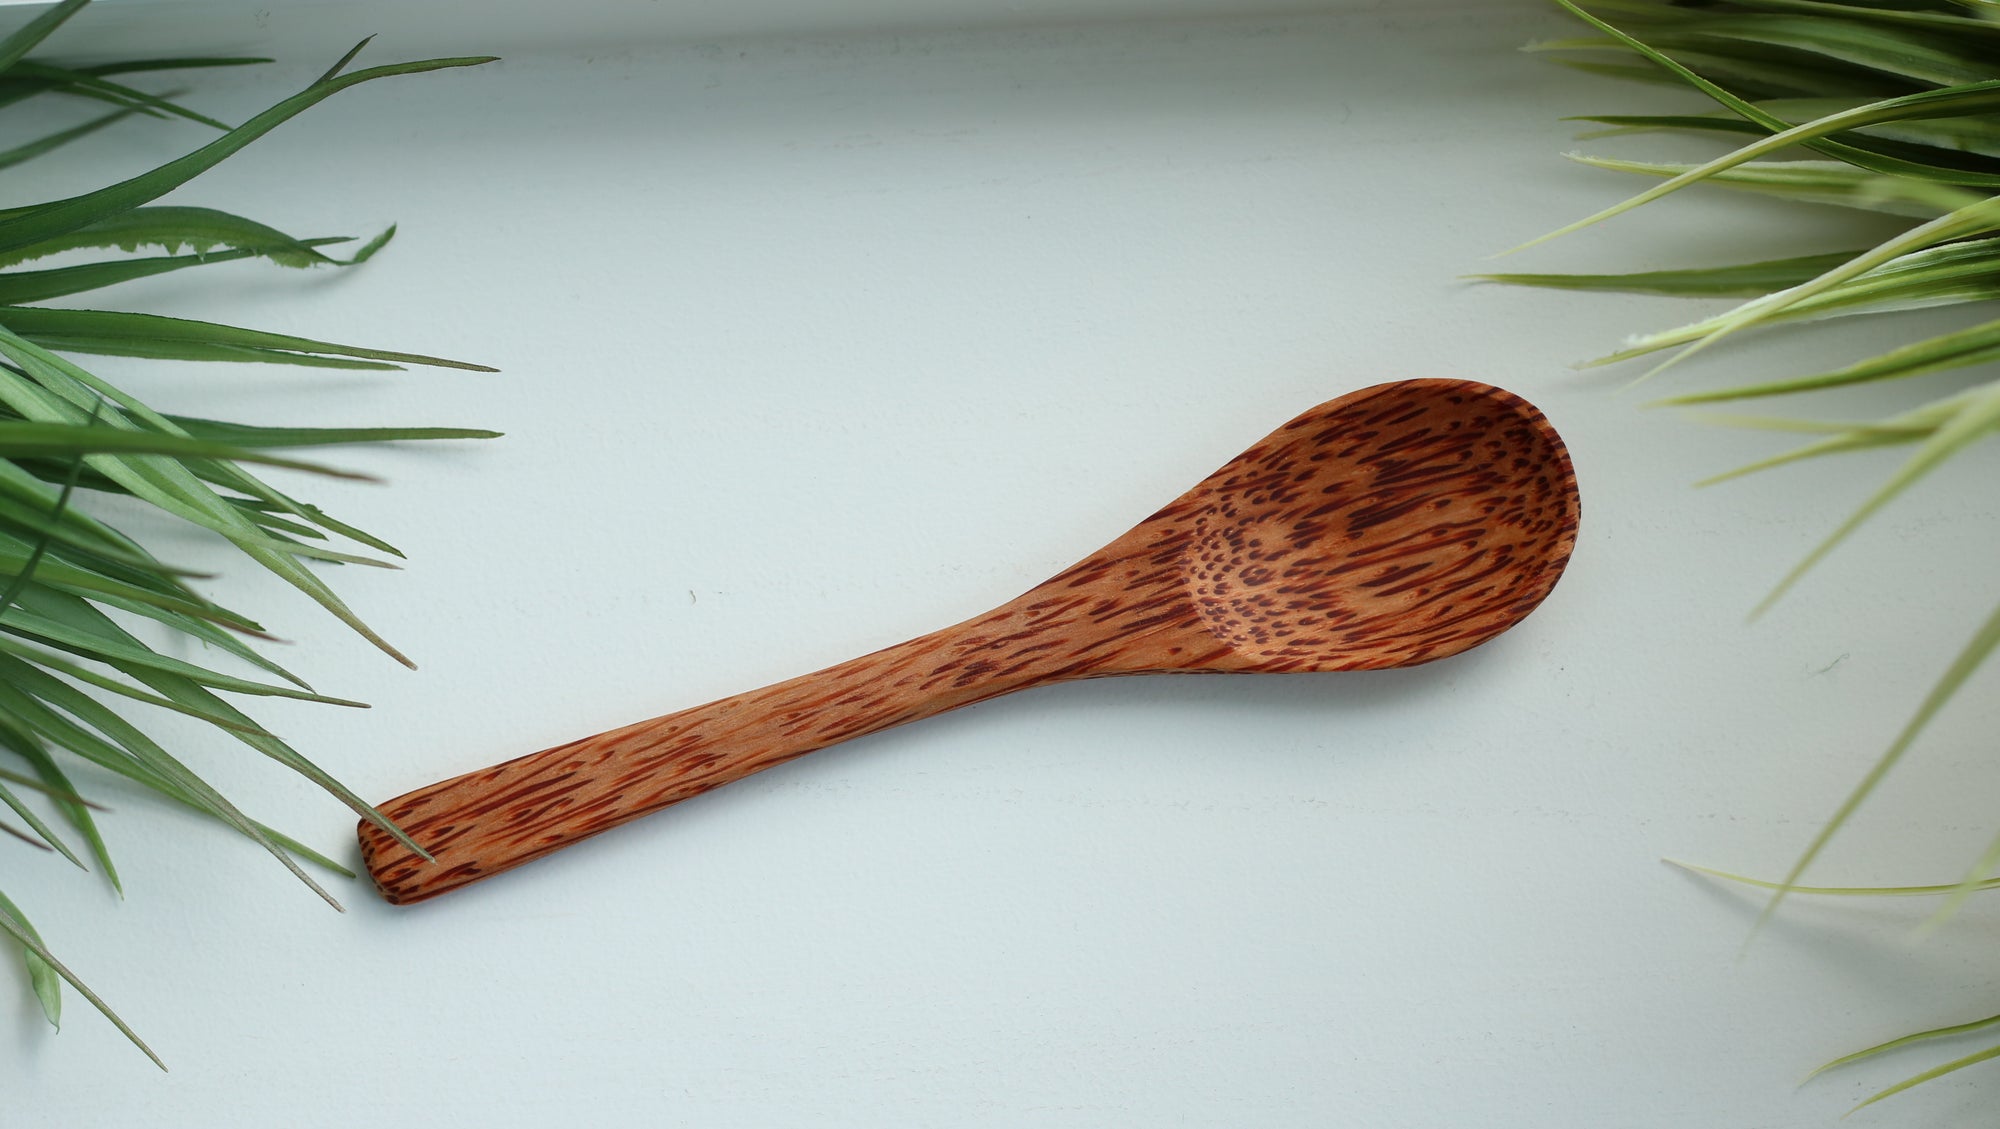 Wooden Coconut Spoons that are designed and handcrafted from palm trees